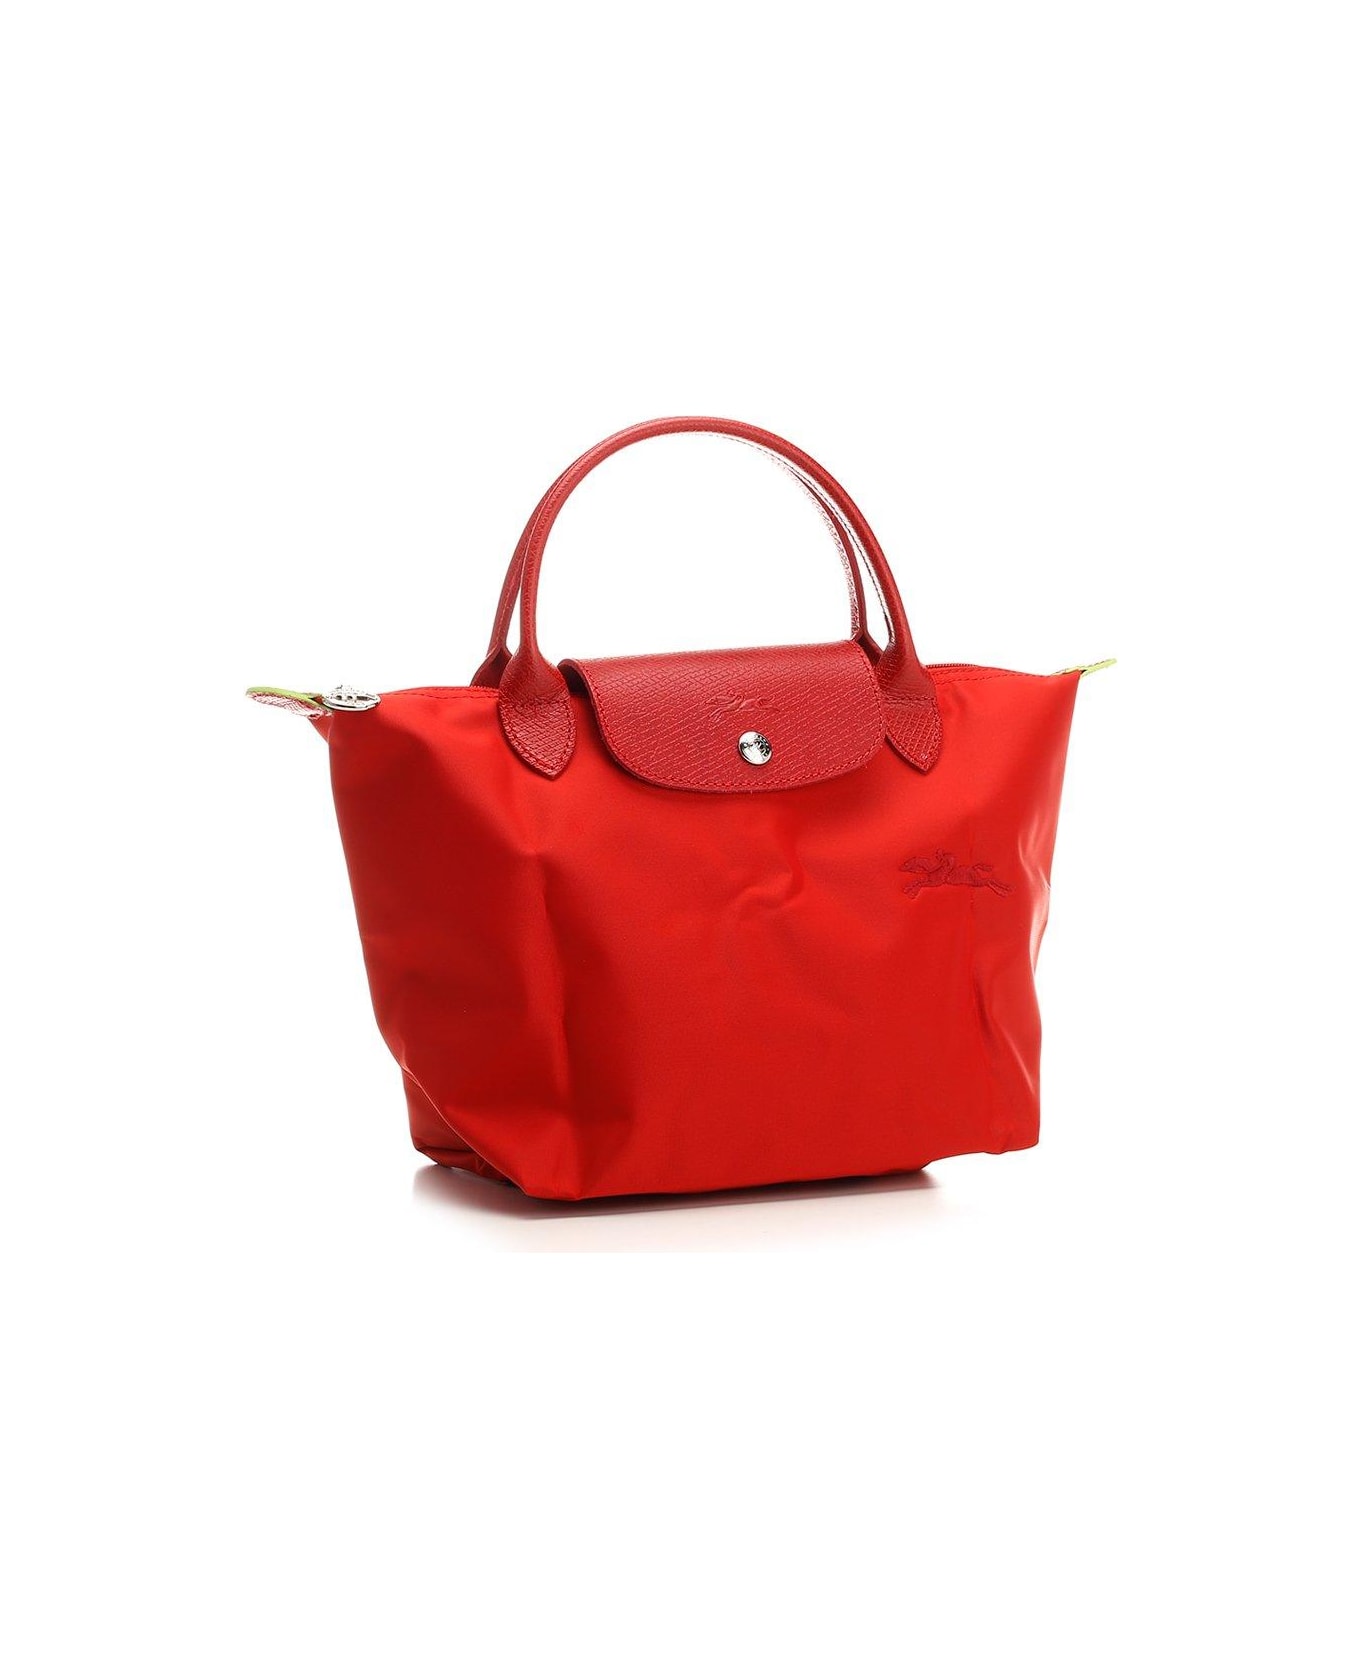 Longchamp Le Pliage Small Top Handle Bag - Red トートバッグ